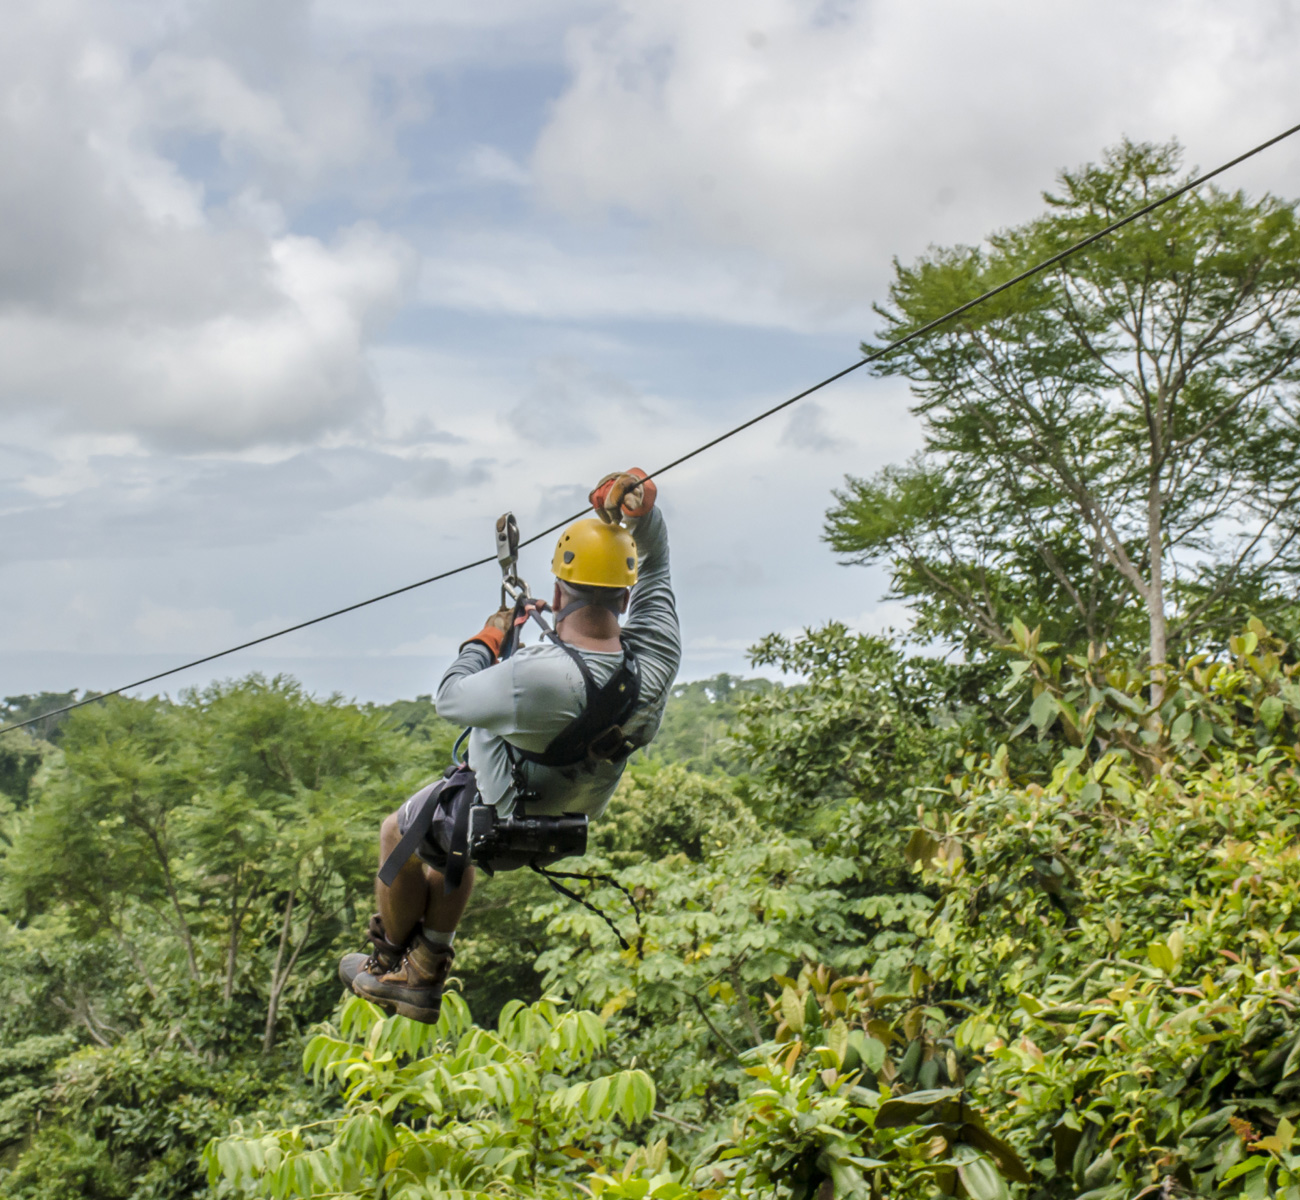 Experience the thrilling Zipline ride at Jollywood, the best outdoor recreation destination in Bengaluru